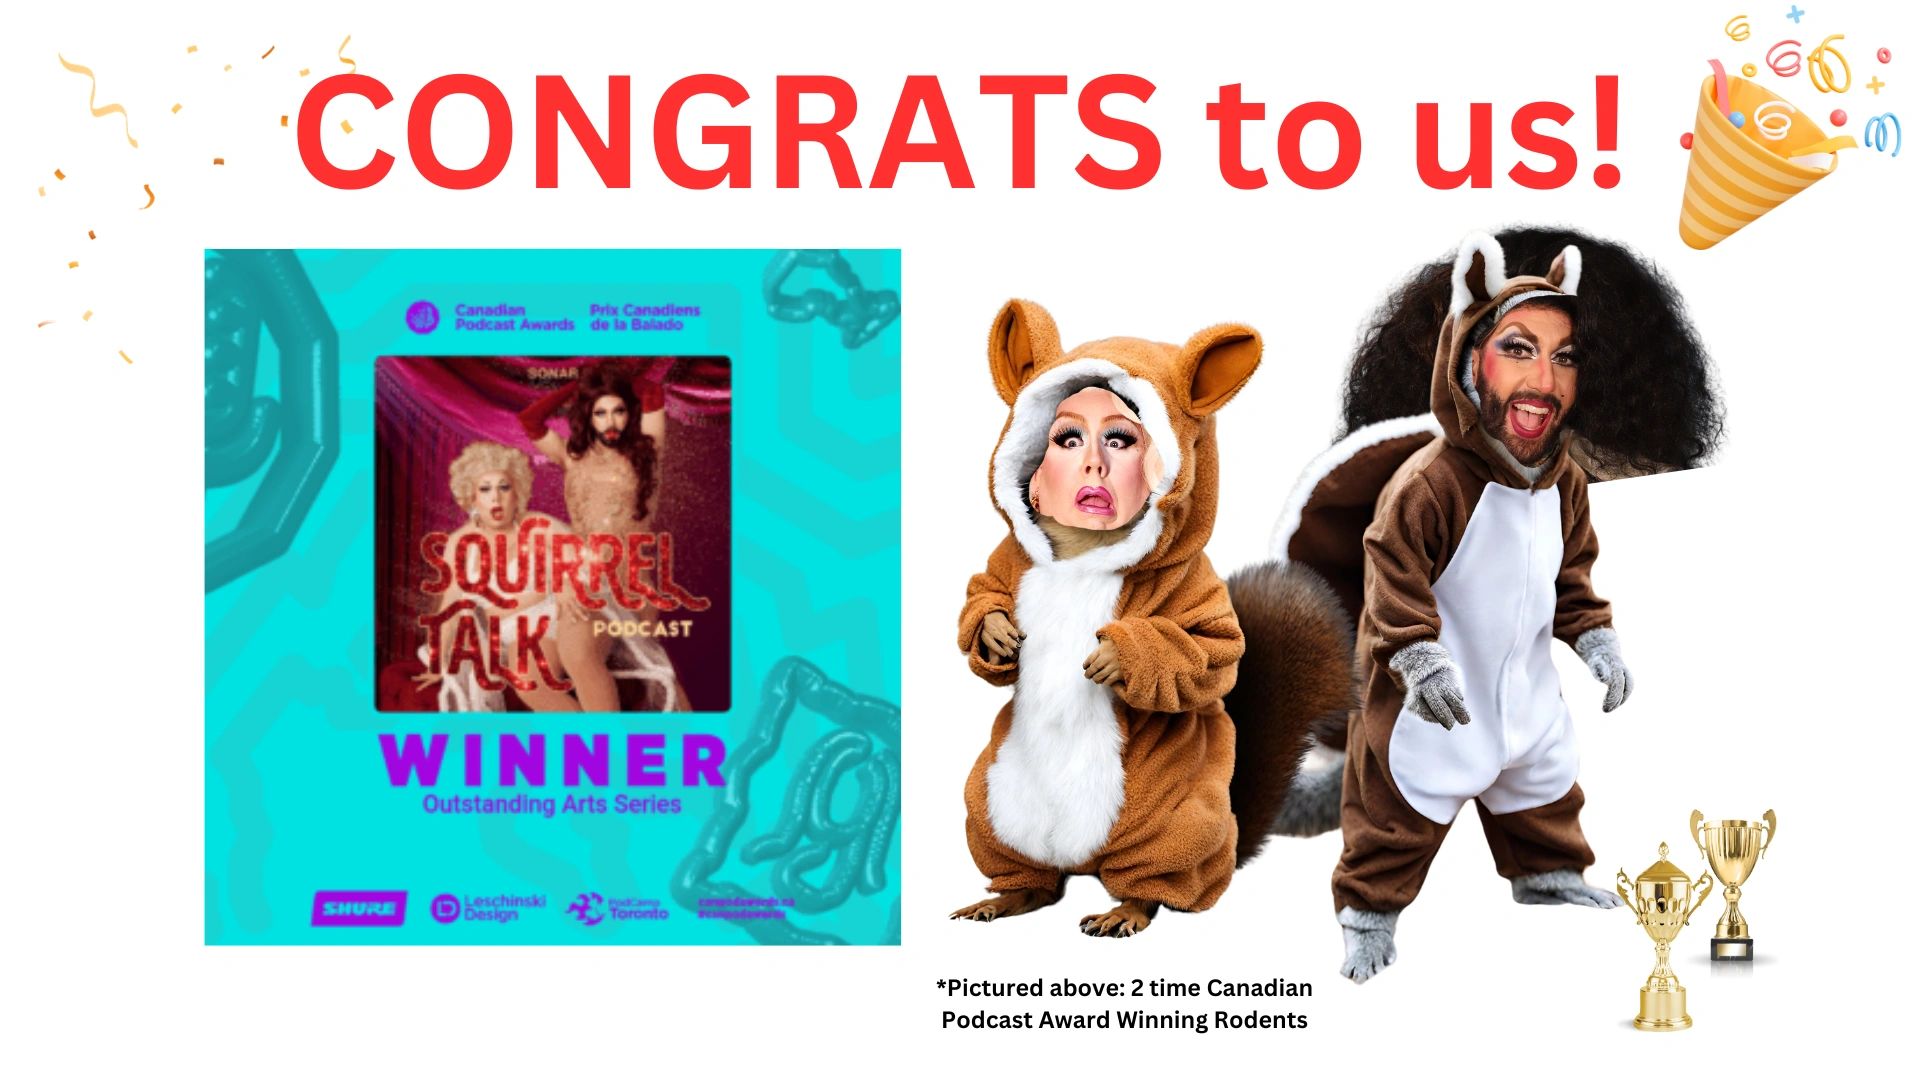 Squirrel Talk is a two time Canadian Podcast Award winner!  They dress as squirrels for the occasion